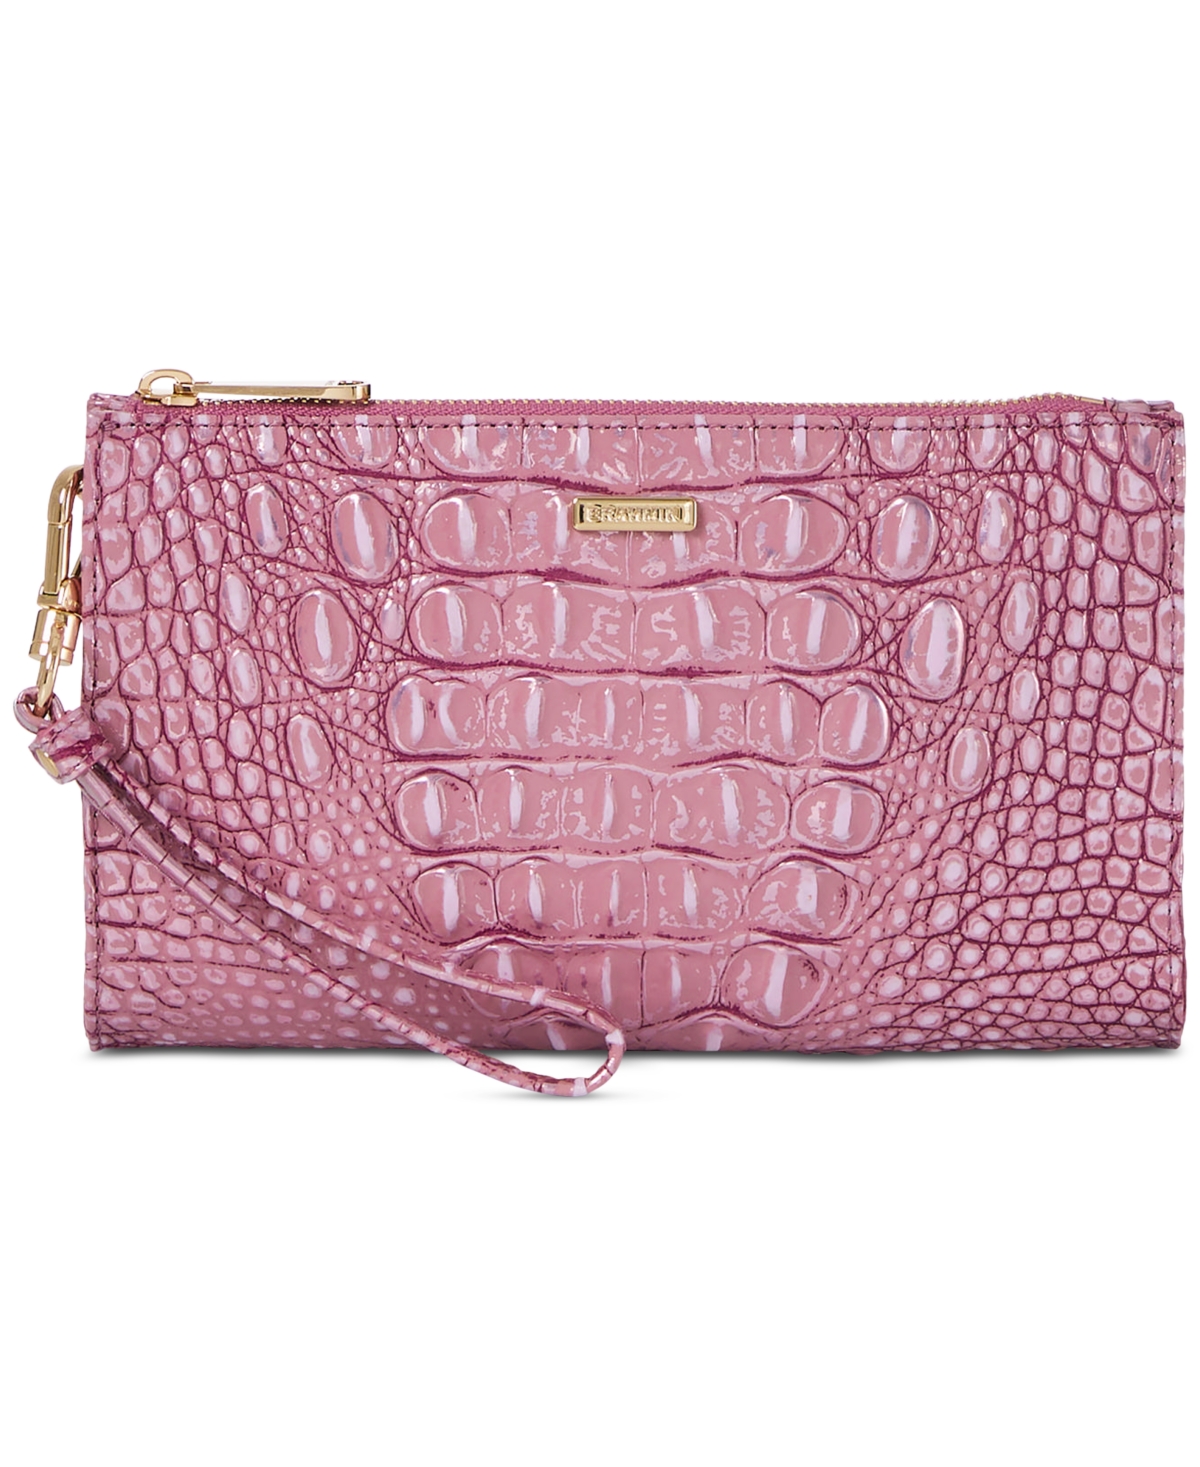 Daisy Mulberry Potion Melbourne Clutch - Mulberry Potion Melbourne